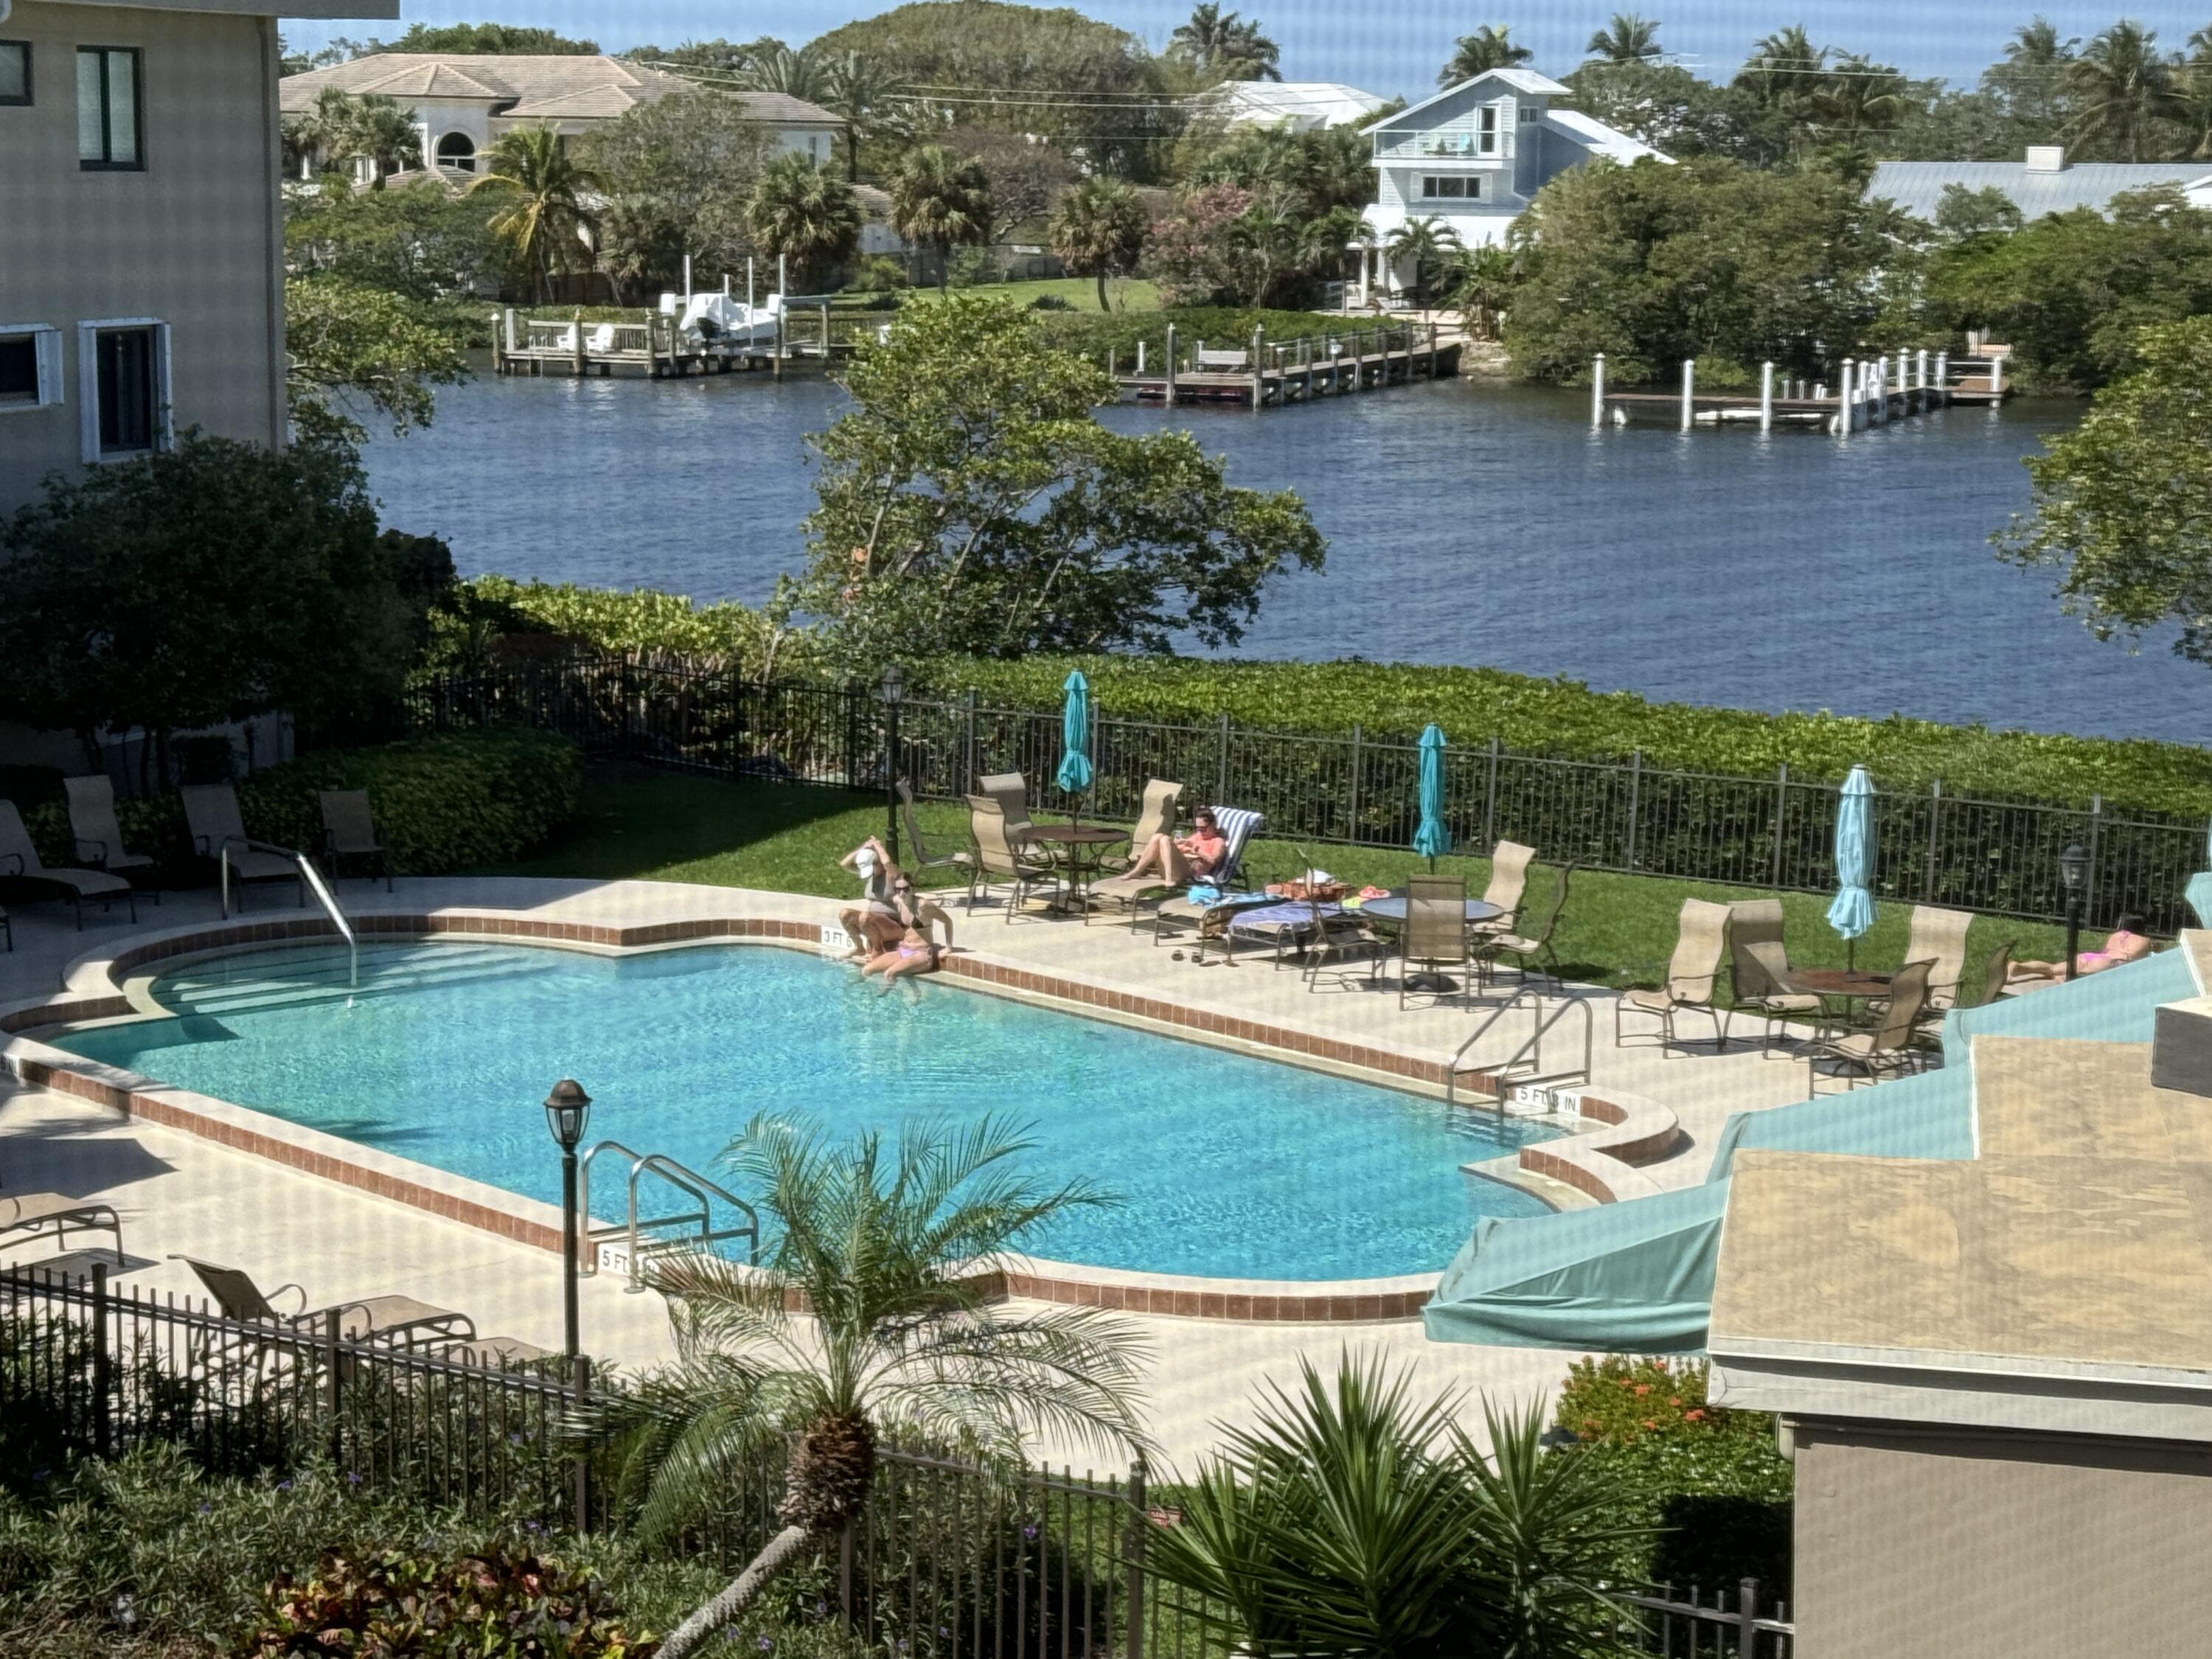 a view of a swimming pool and lounge chairs